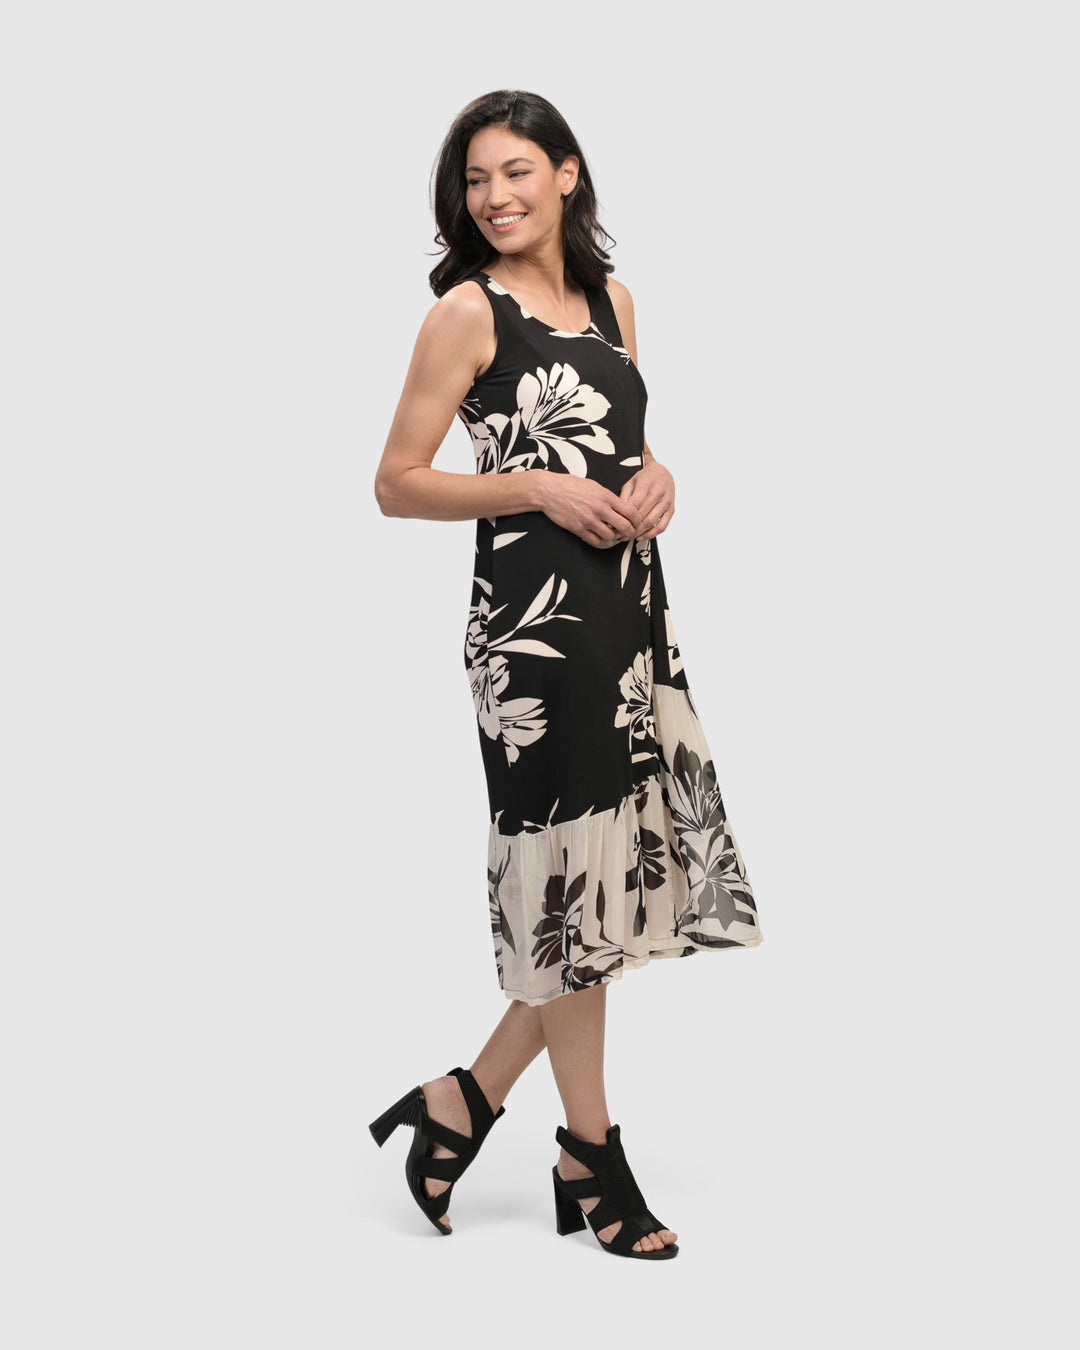 Prosecco Sleeveless Tunic Dress, Floral